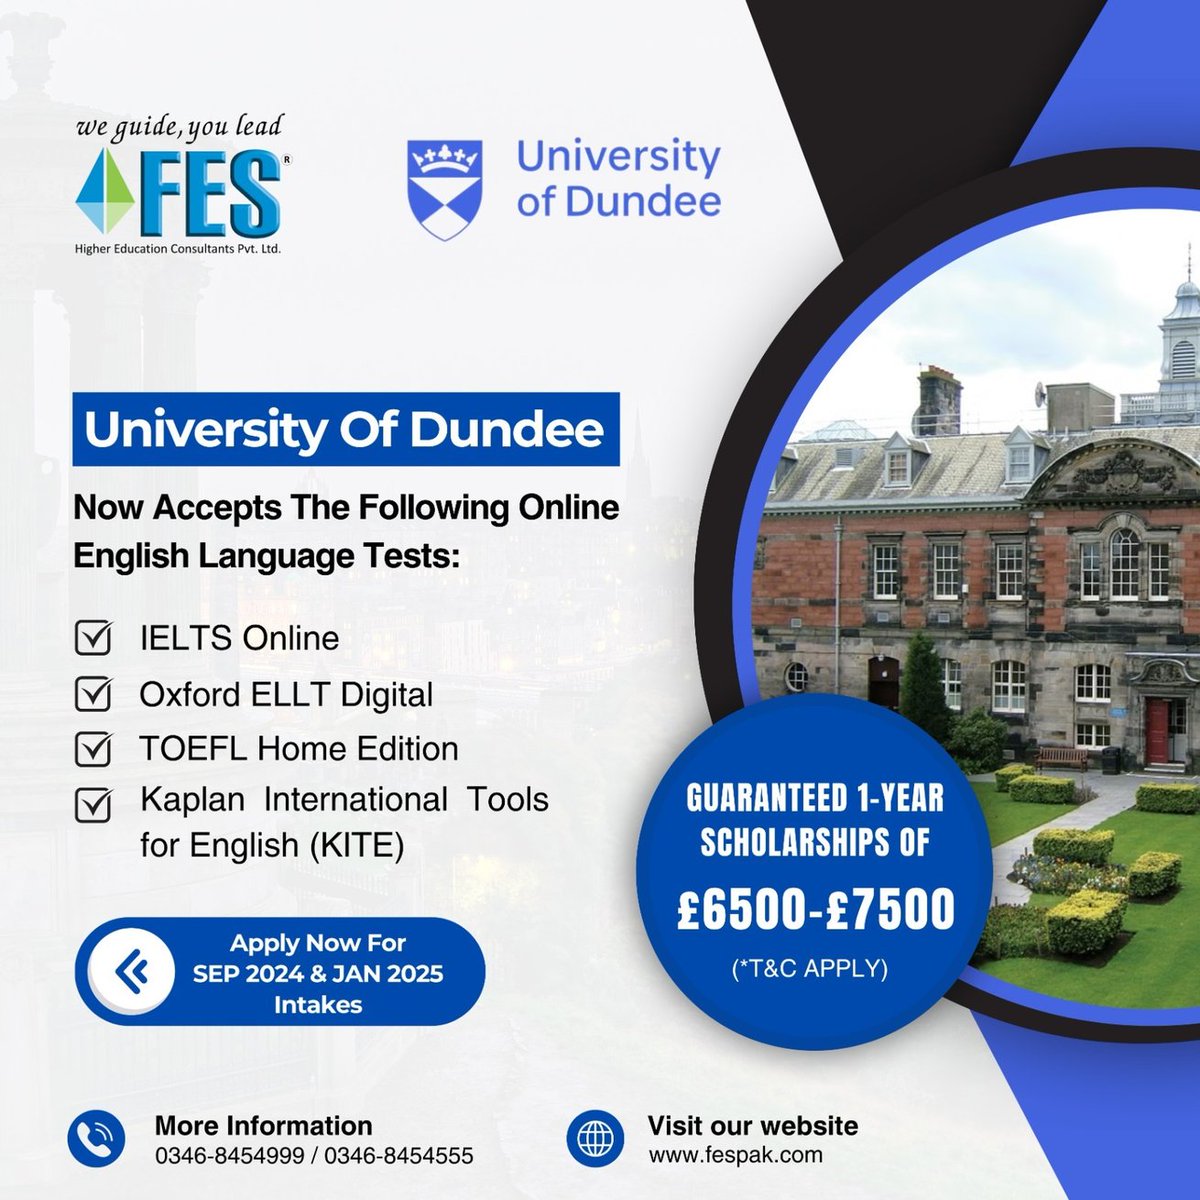 University of Dundee now accepts online English Language tests. Grab scholarships and apply for SEP 2024 & JAN 2025 Intakes.
For More Info
0346 8454999/0346 8454555
We Guide You Lead
fespak.com
#fes #fesconsultants #studyabroad #studyinuk #scholarships  #studentvisa